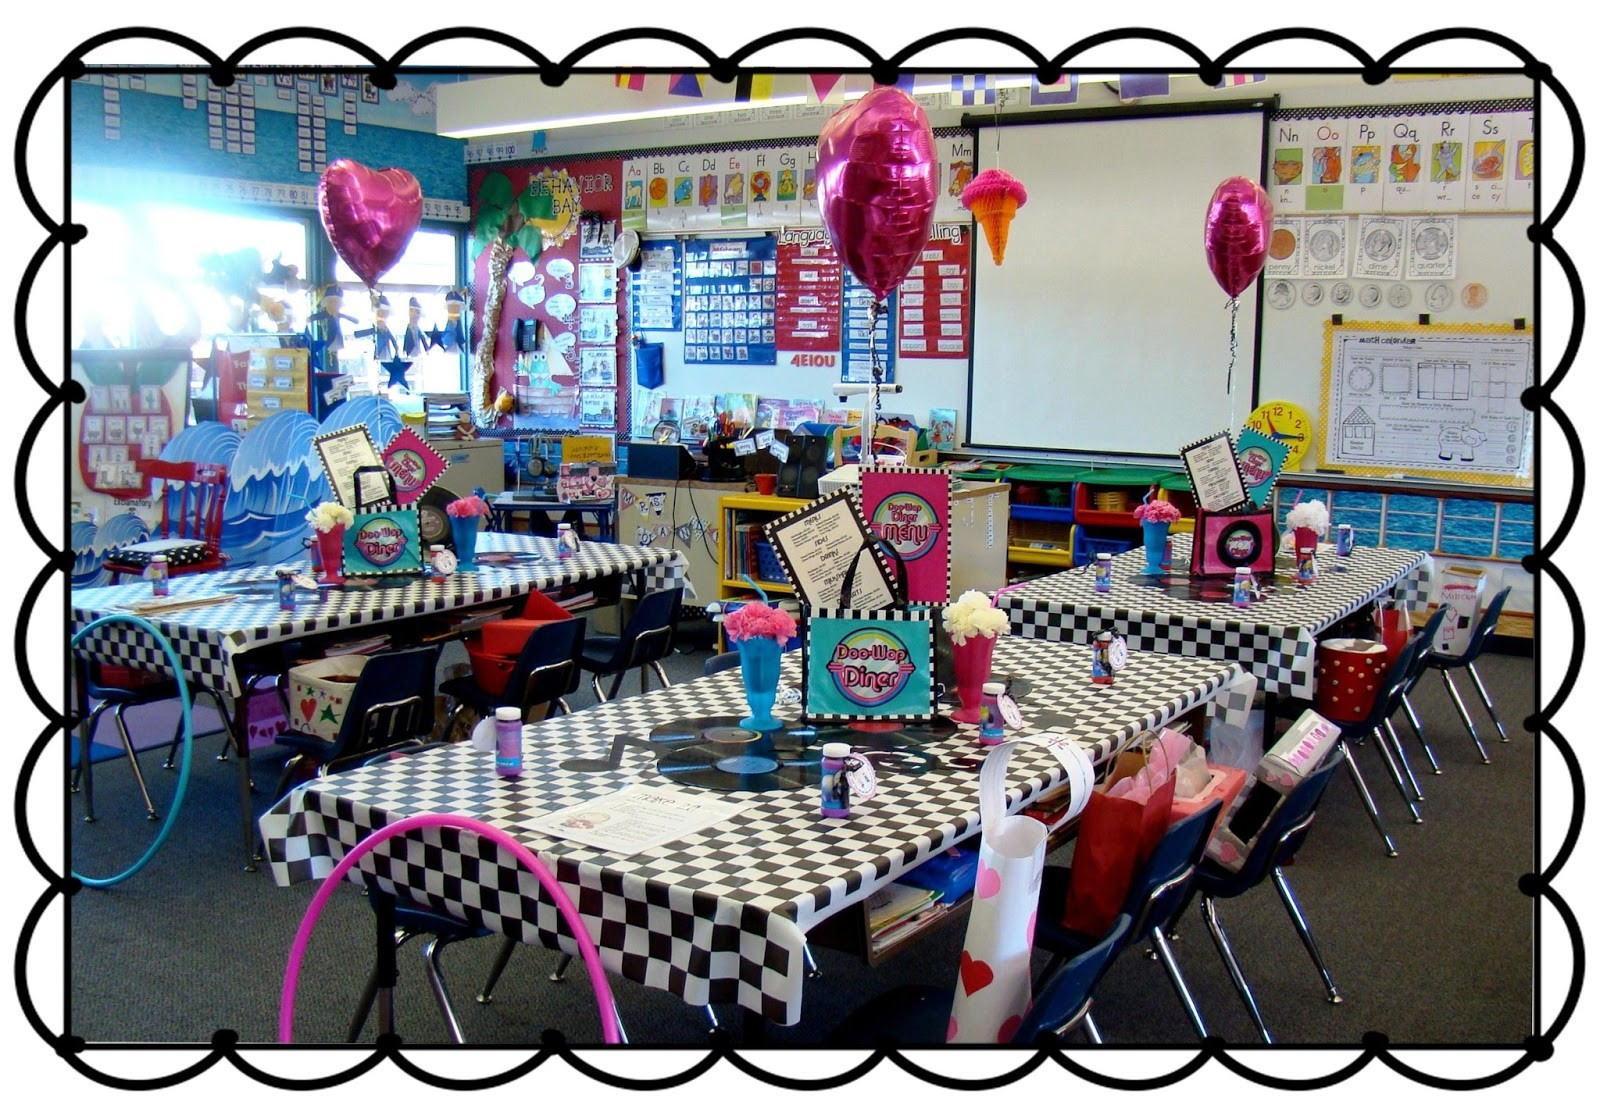 Classroom Birthday Party Ideas
 Sailing Through 1st Grade Our 1st Grade Valentine s Party